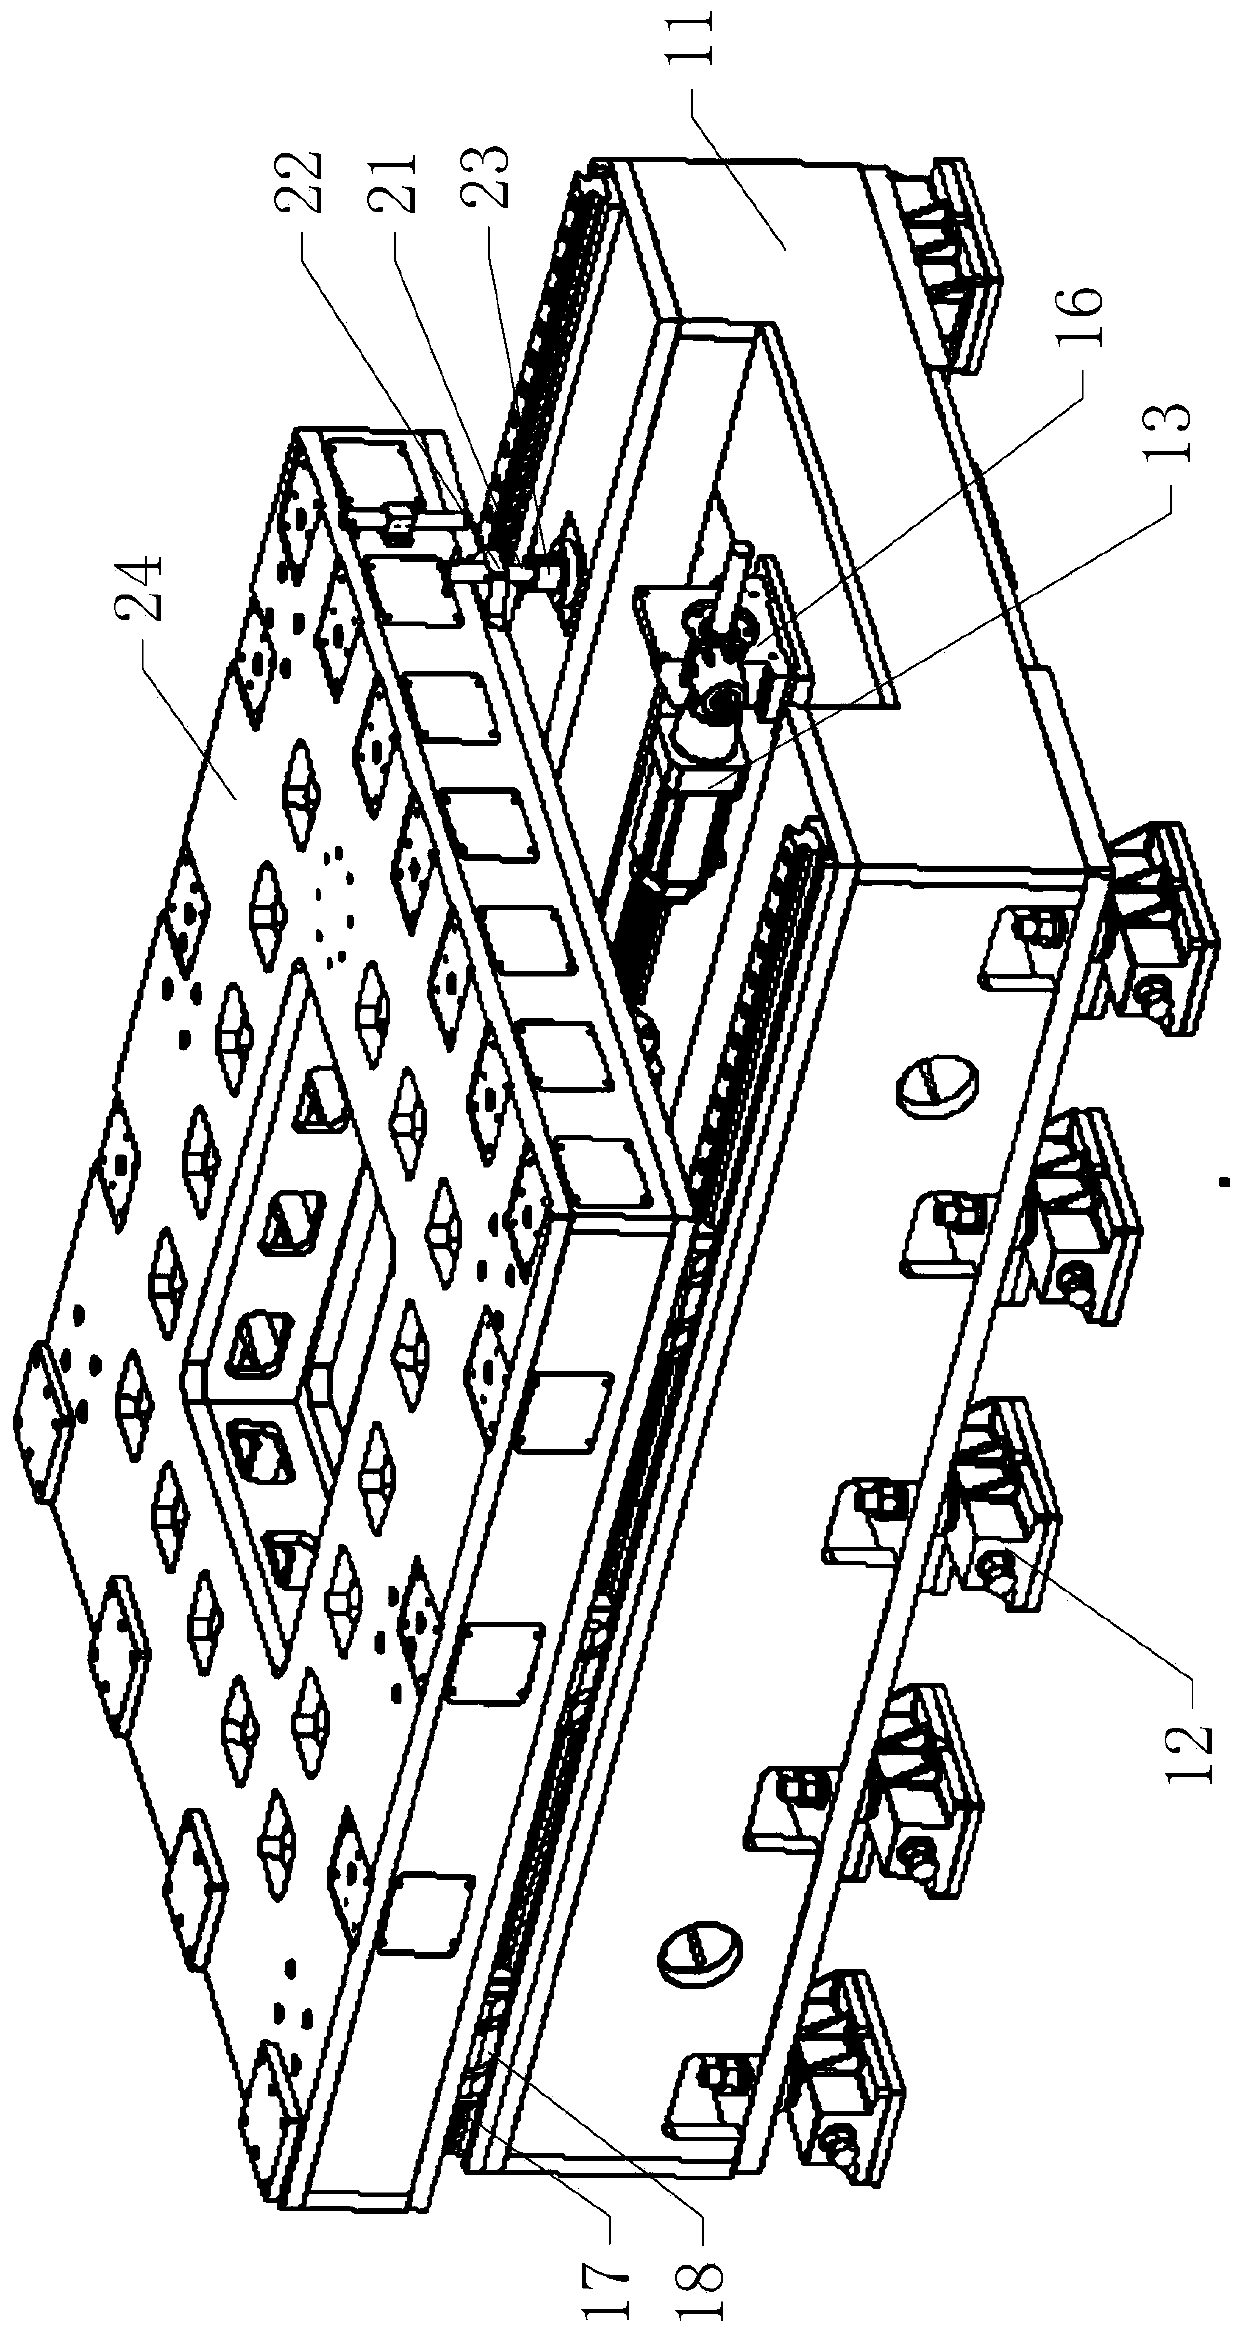 A Mechanical Attitude Adjustment System for Wing Root Rib Positioning Tooling